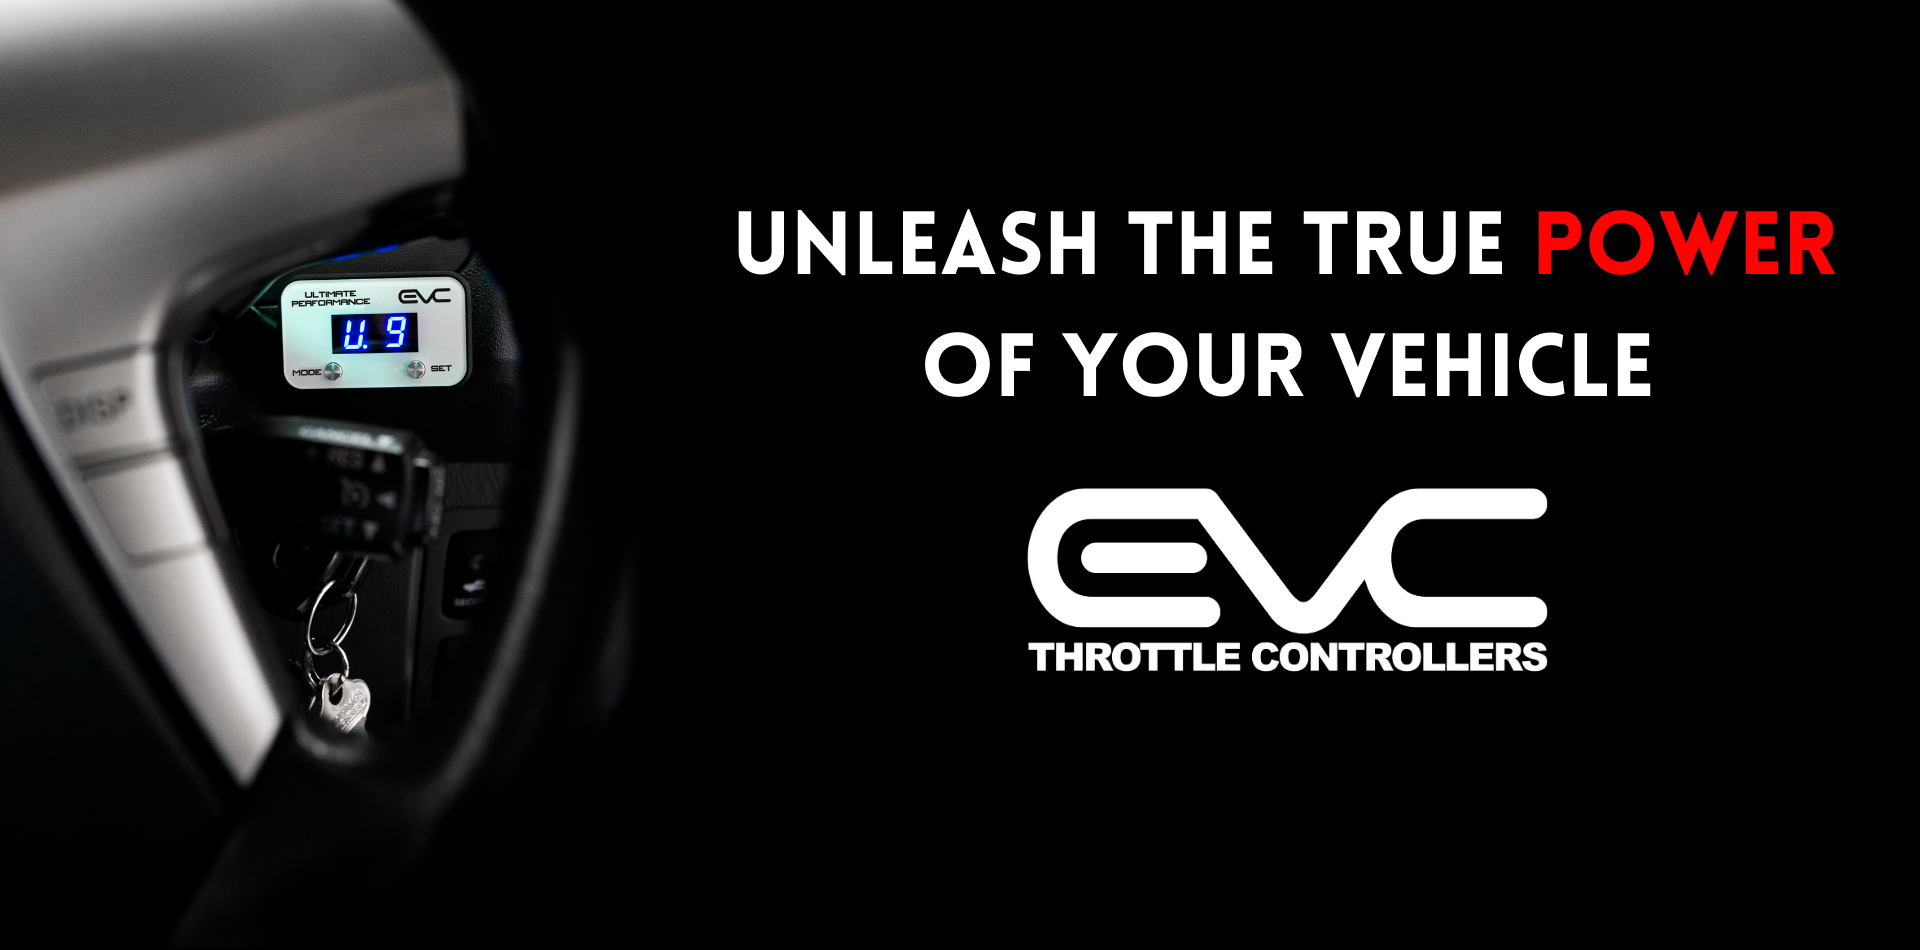 EVC THROTTLE CONTROLLERS